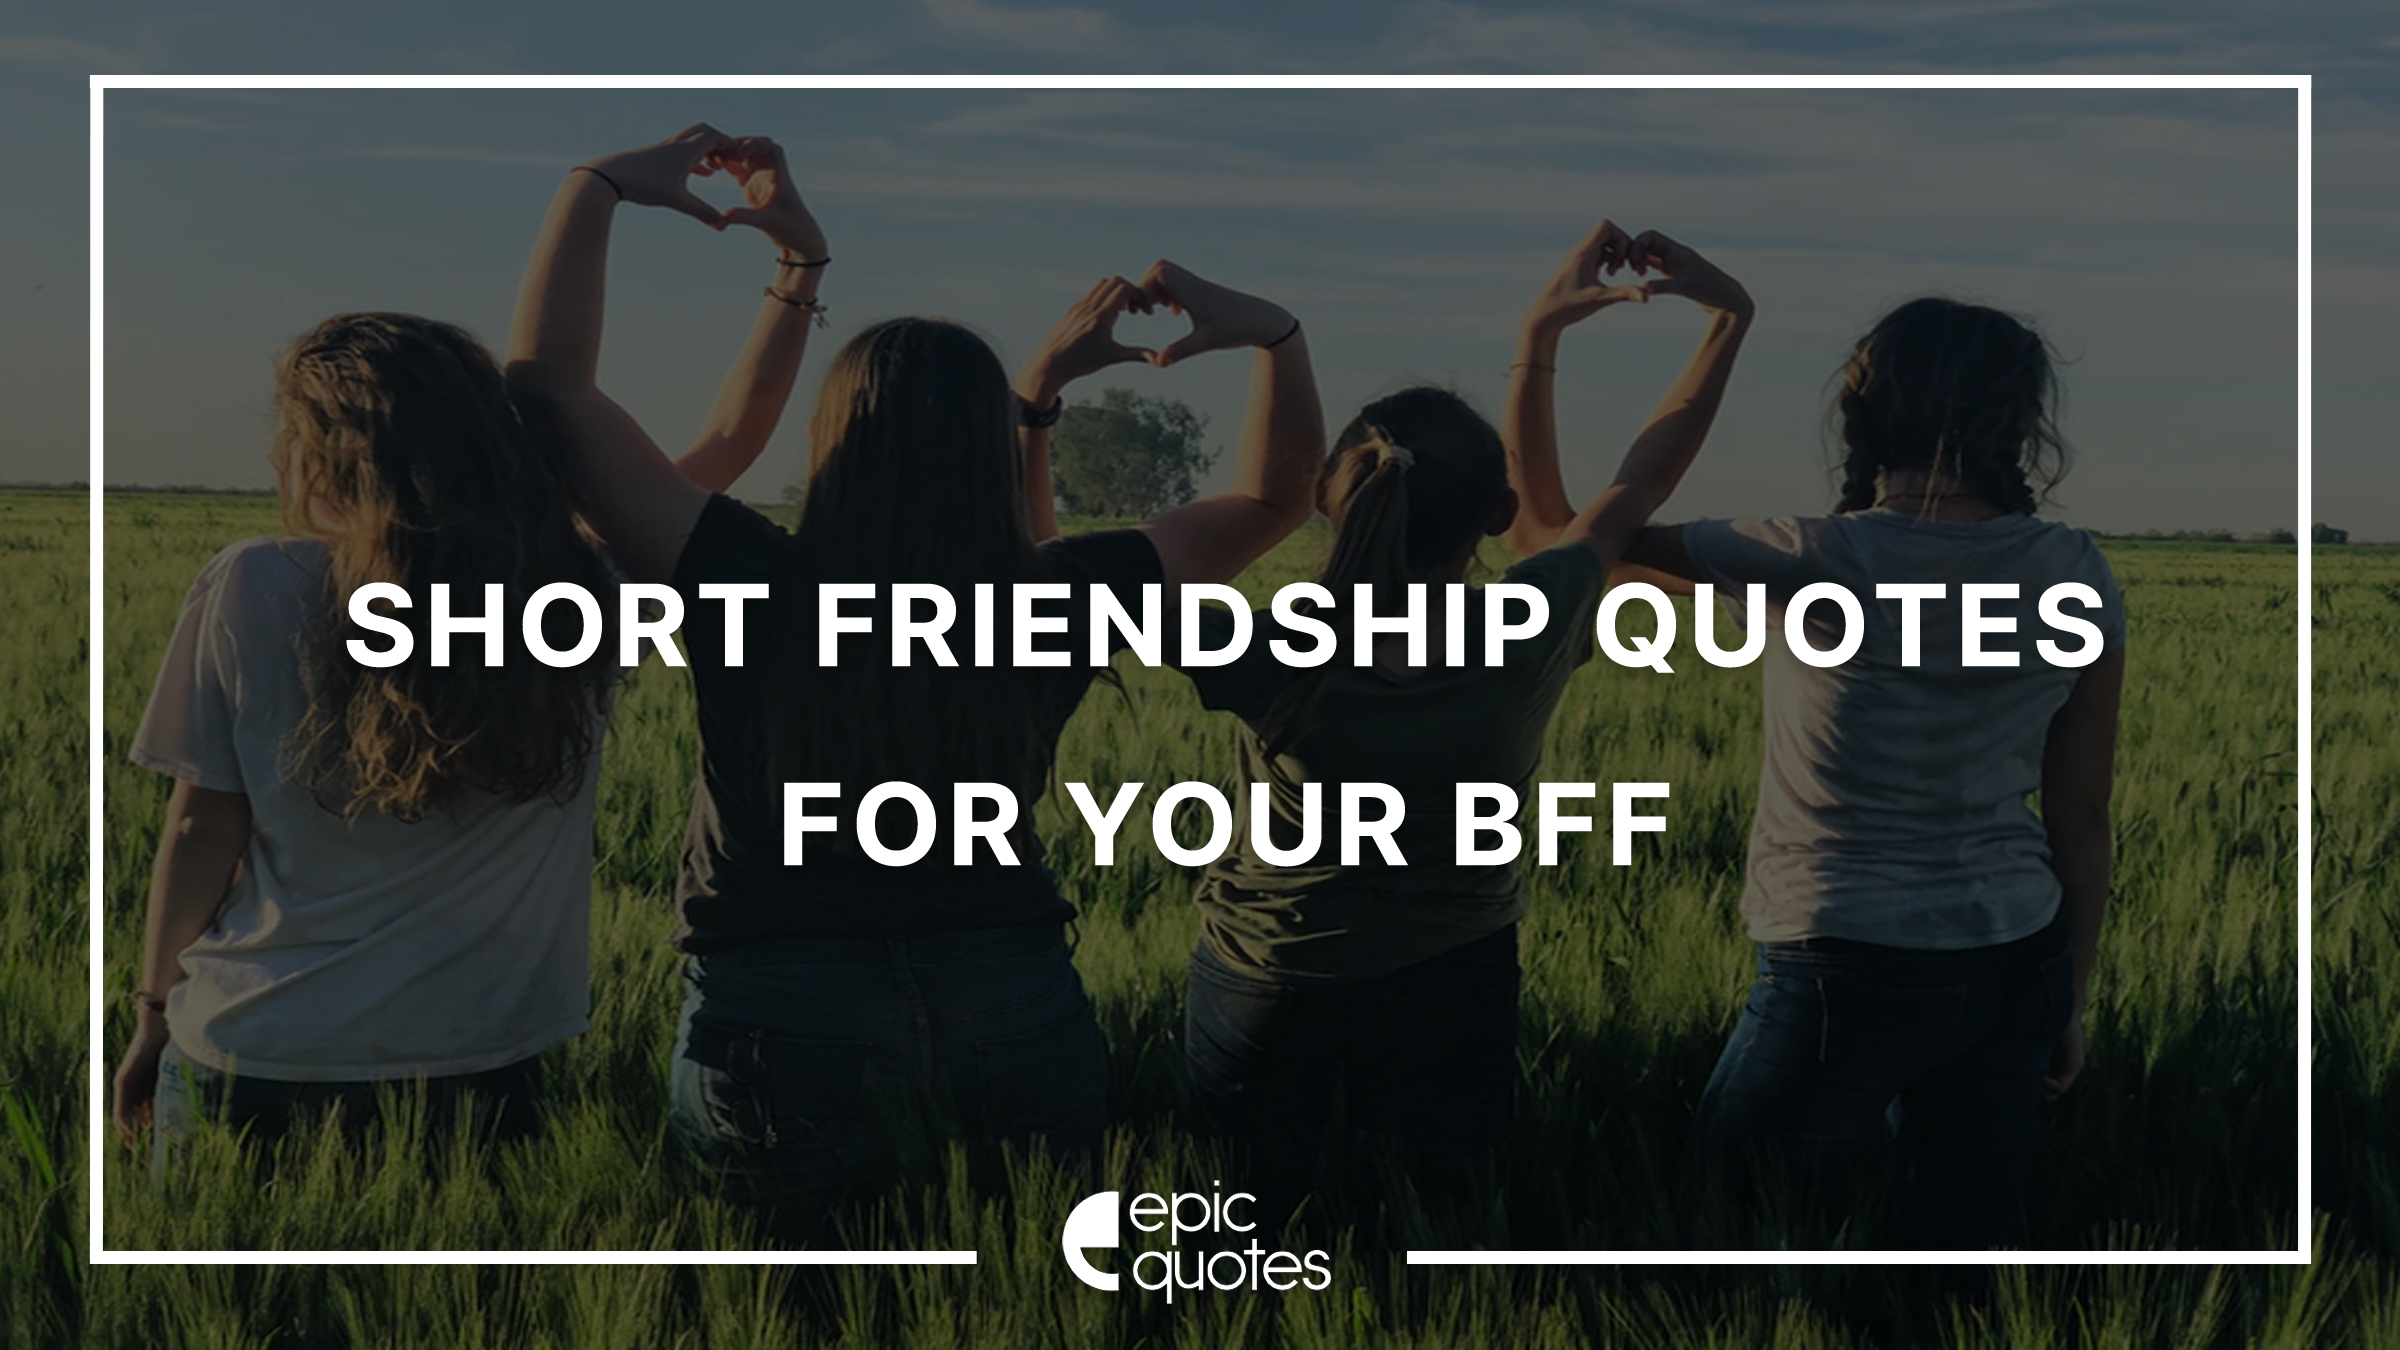 Bff captions quoes epicquotes